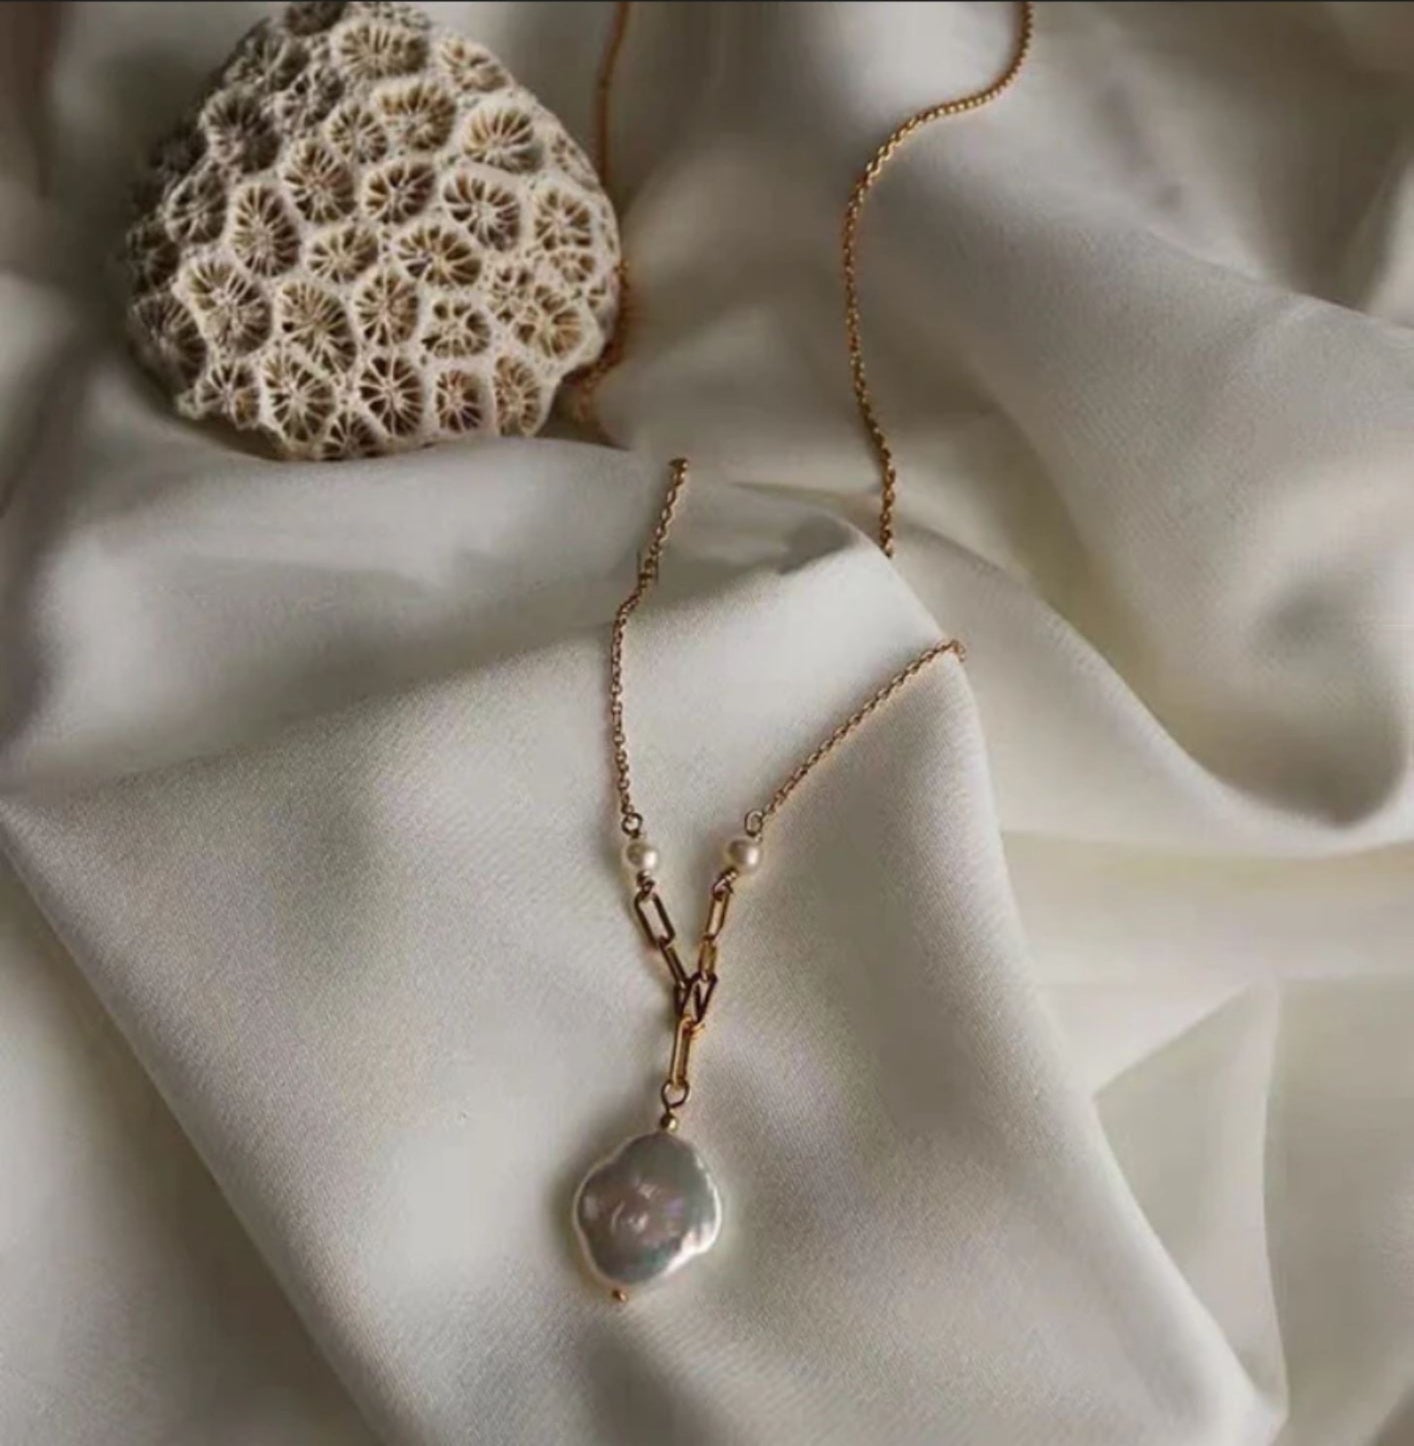 OLIV SEA PEARLS NECKLACE neck Yubama Jewelry Online Store - The Elegant Designs of Gold and Silver ! 